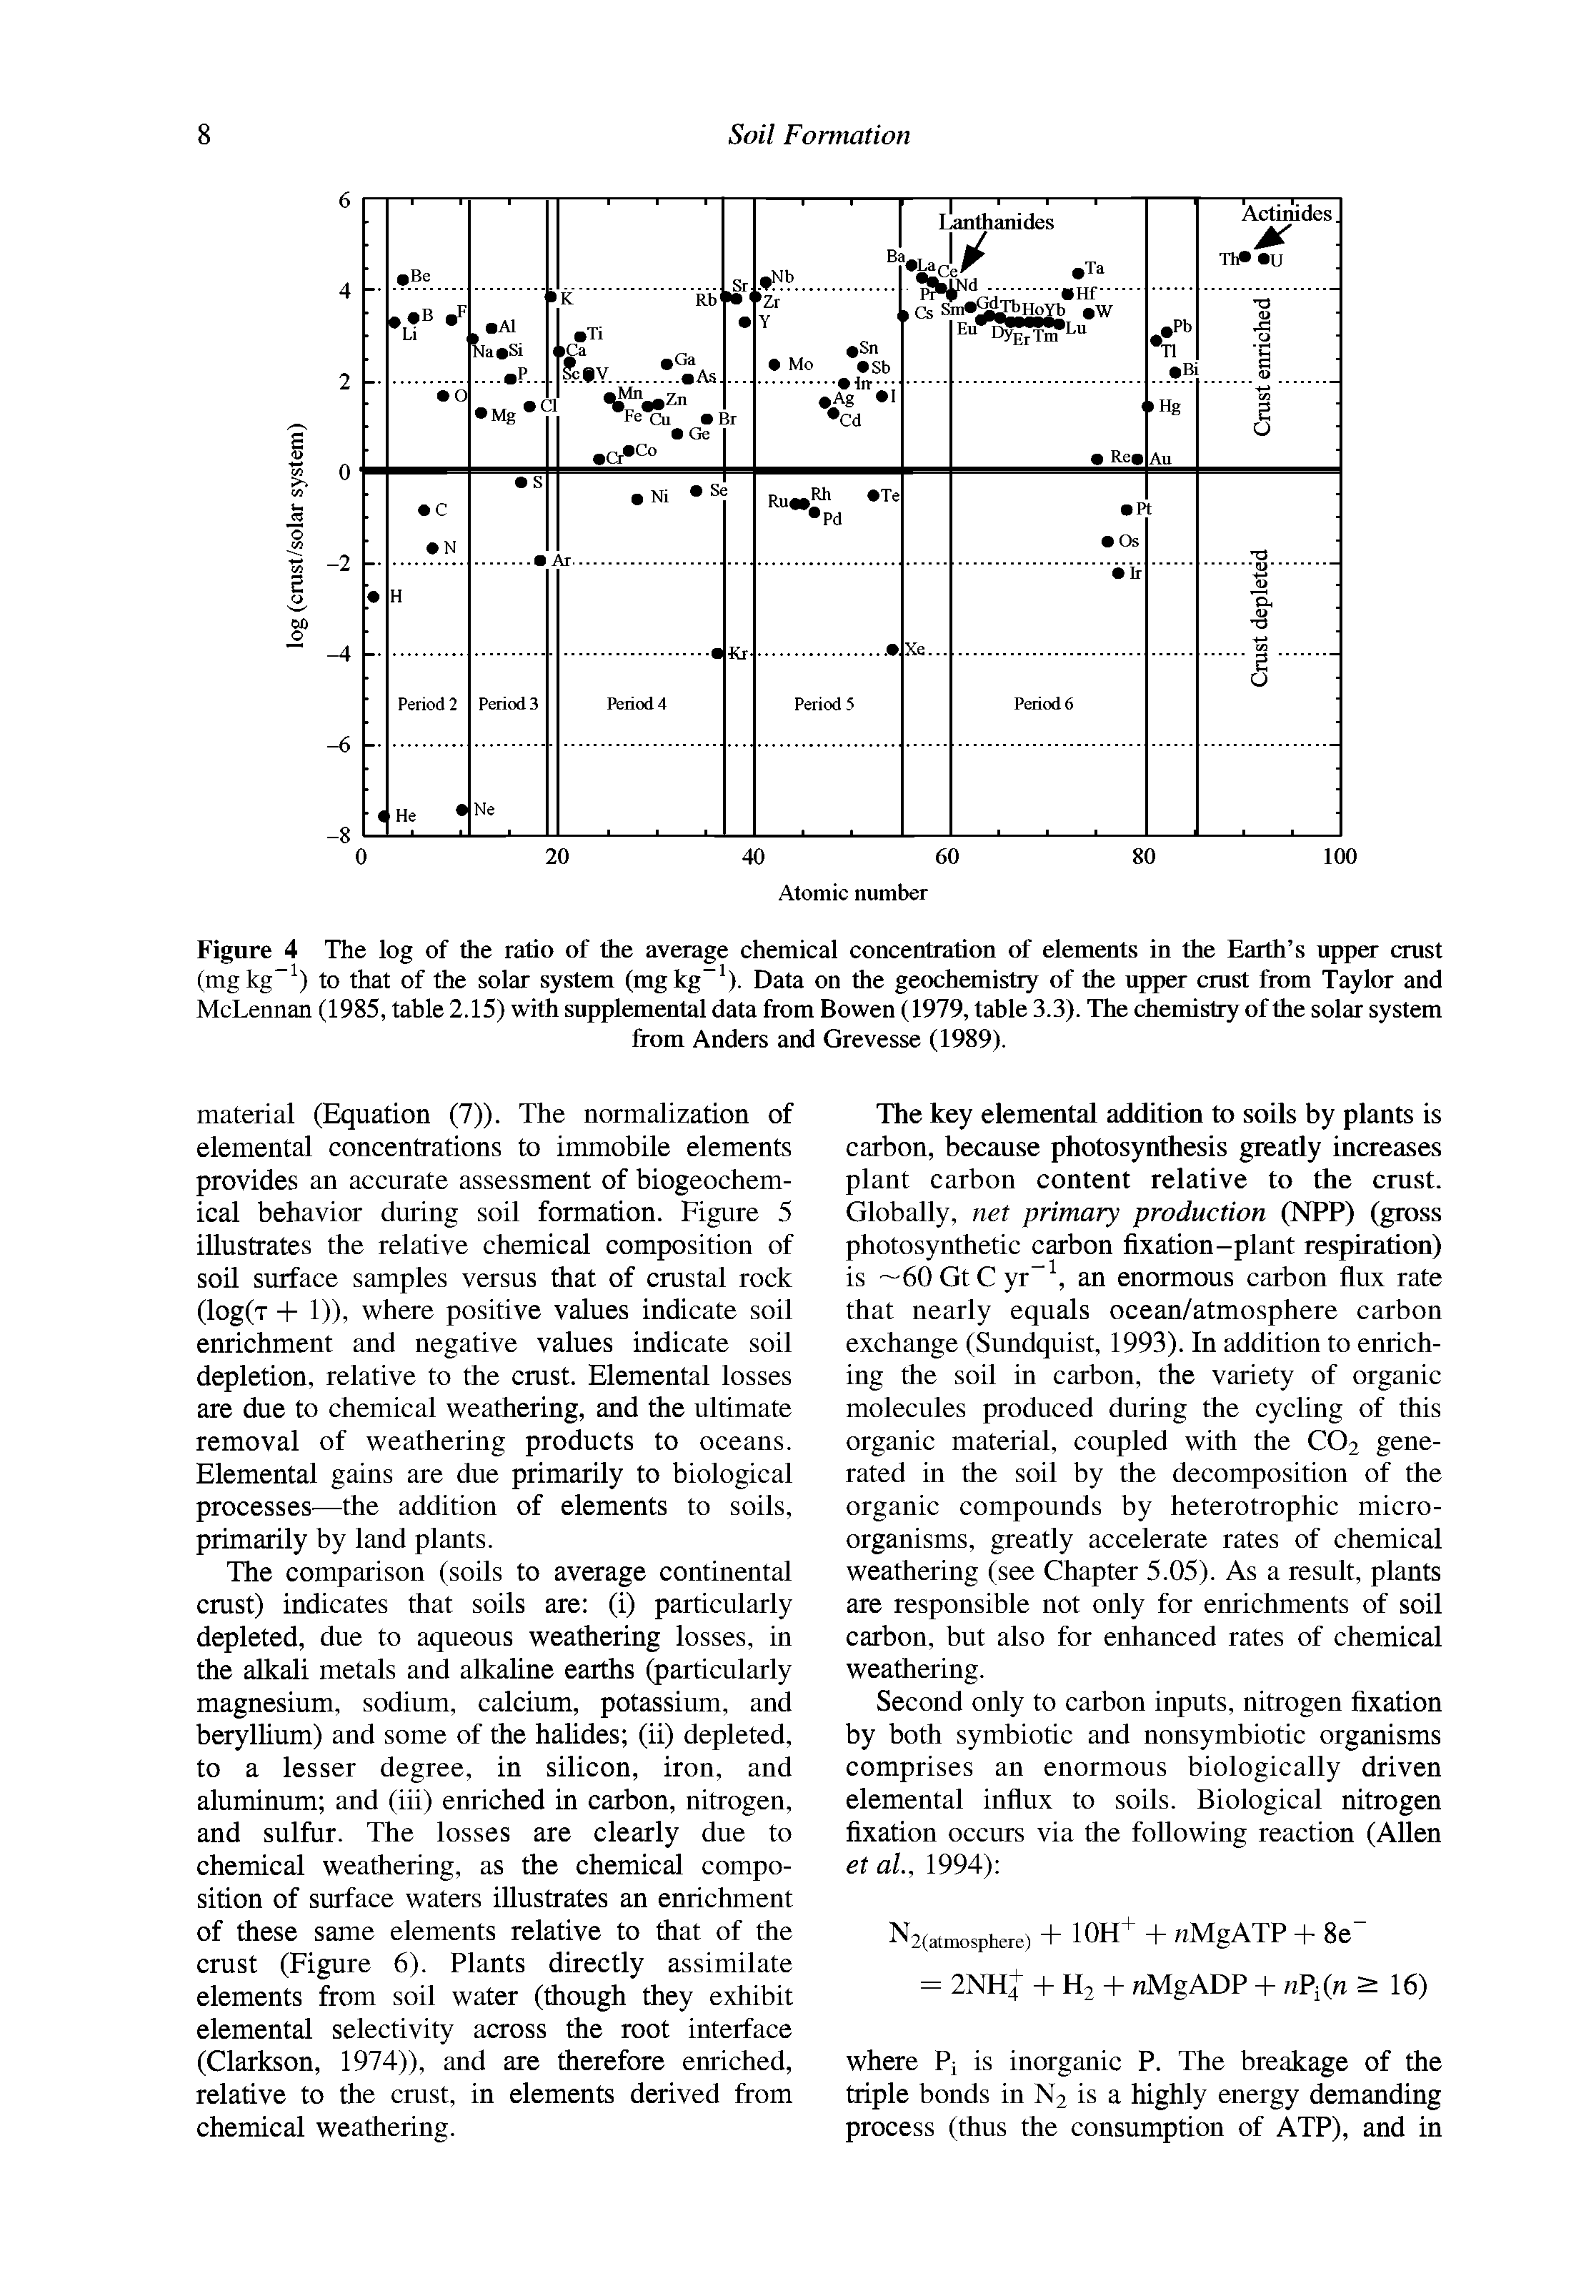 Figure 4 The log of the ratio of the average chemical concentration of elements in the Earth s upper crust (mgkg ) to that of the solar system (mgkg ). Data on the geochemistry of the upper crust from Taylor and McLennan (1985, table 2.15) with supplemental data from Bowen (1979, table 3.3). The chemistry of the solar system...